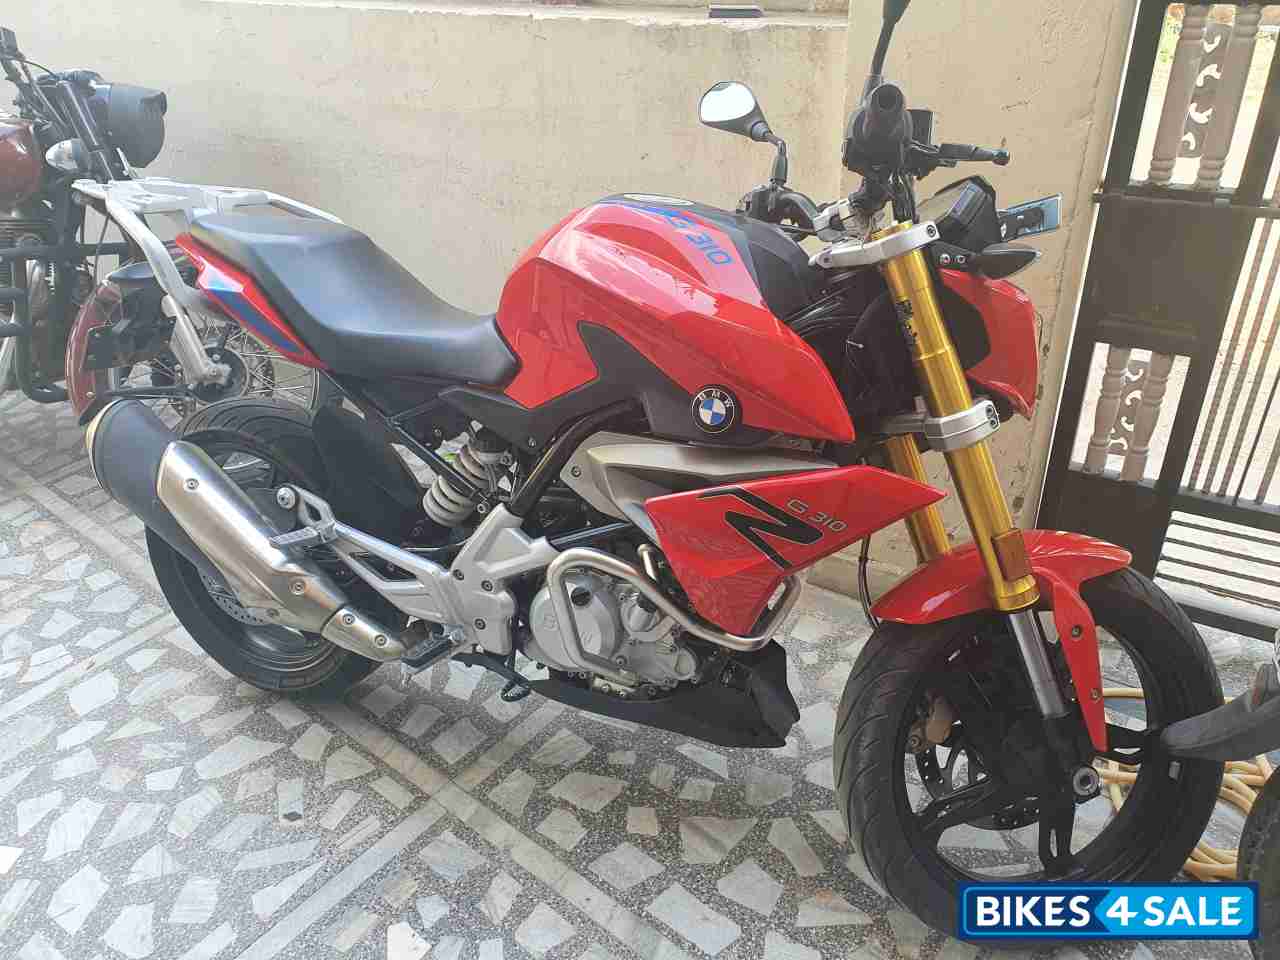 Used 19 Model Bmw G 310 R For Sale In Jaipur Id Bikes4sale